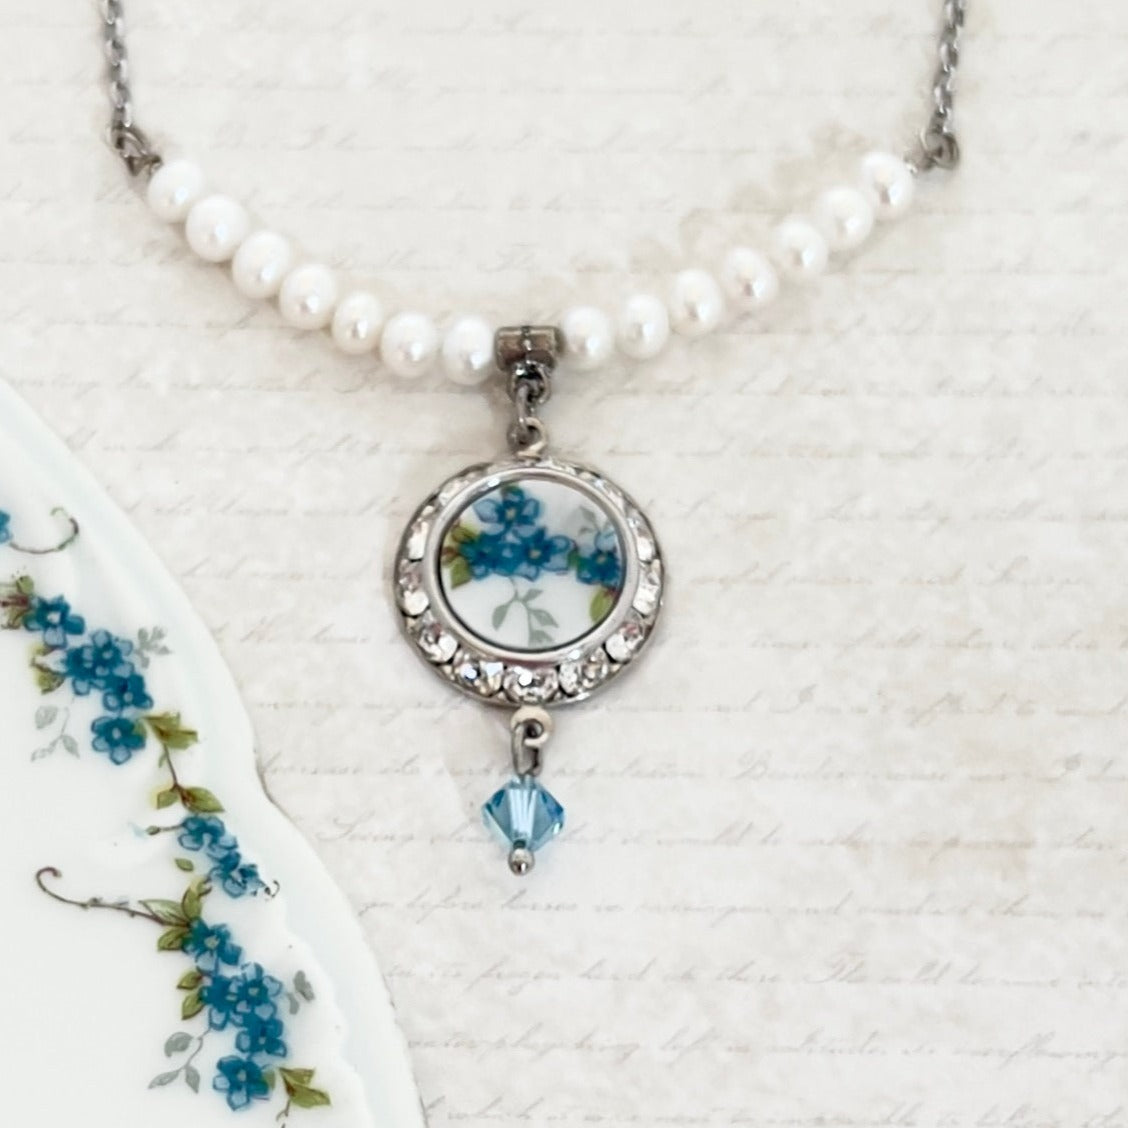 Forget Me Not Broken China Jewelry, Crystal and Pearl Necklace, Unique Handmade Jewelry Gifts